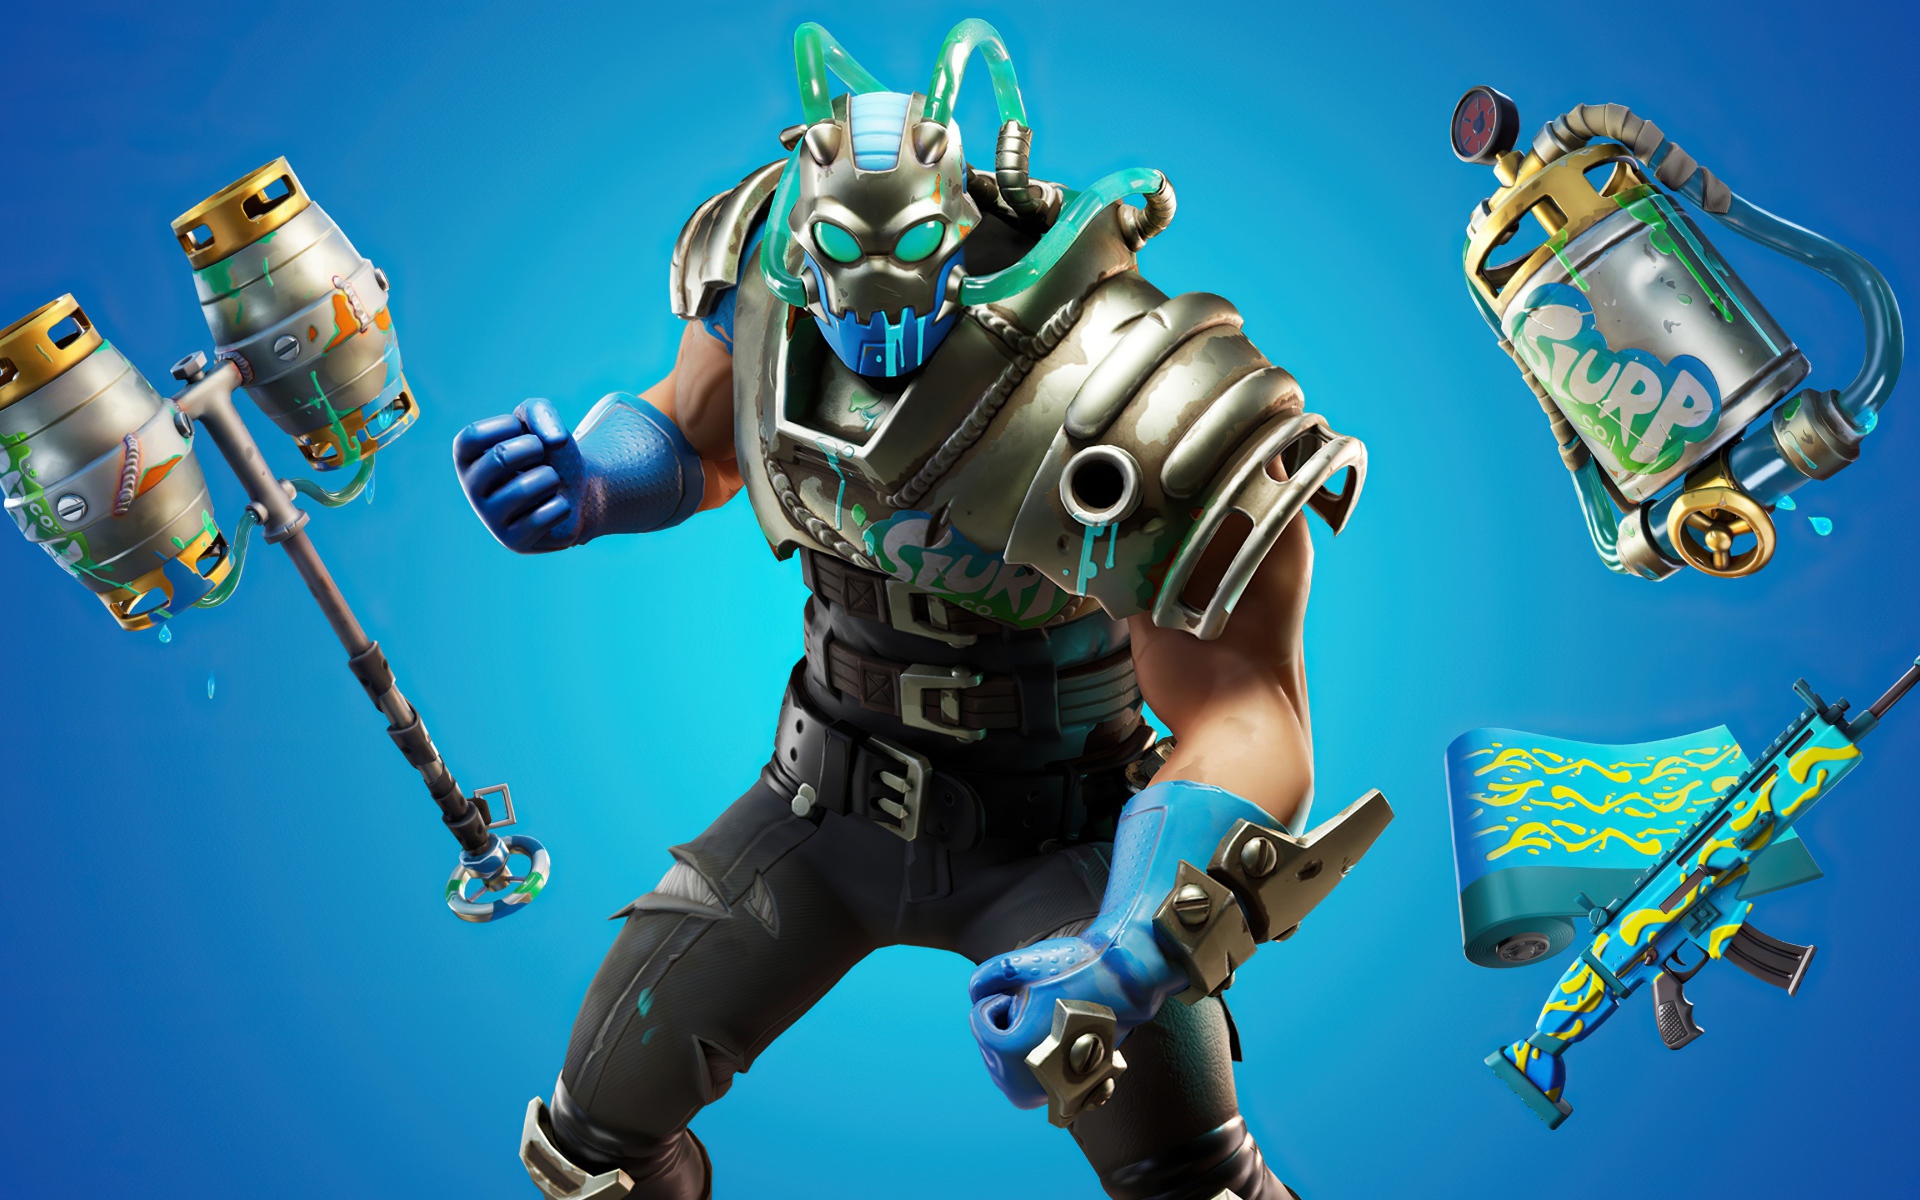 Warrior chooses weapons in Fortnite game on blue background